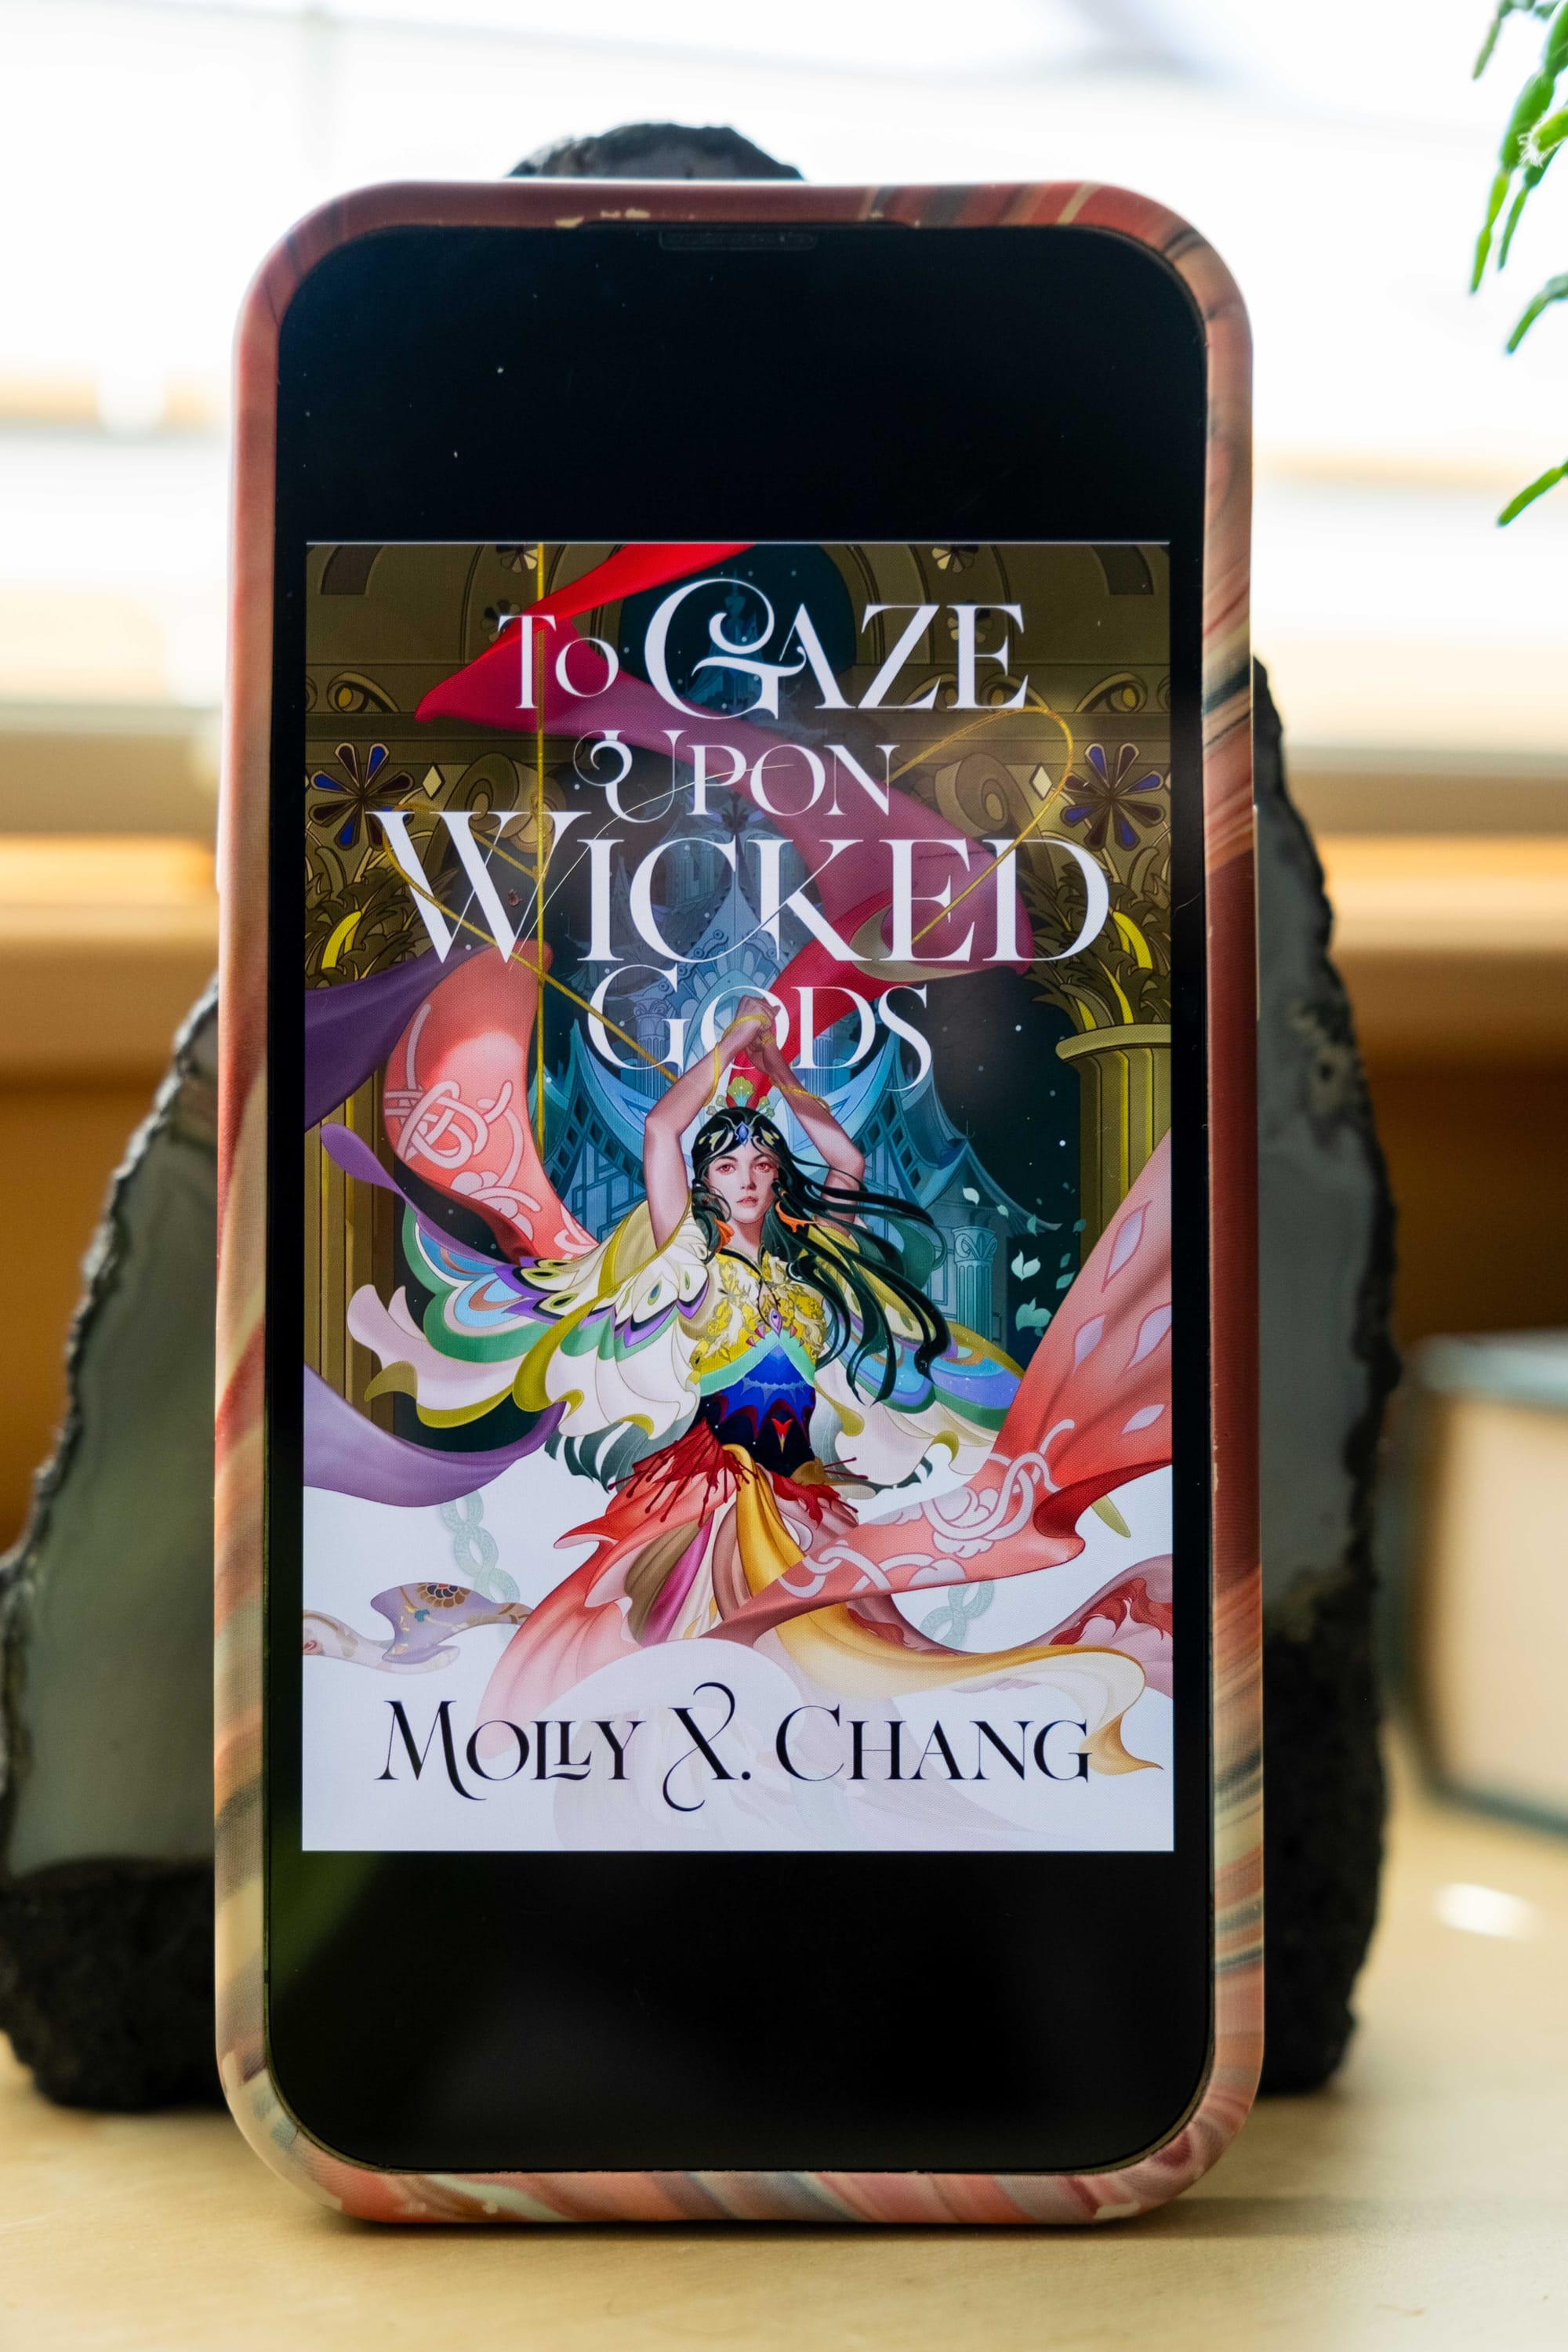 Book cover for To Gaze Upon Wicked Gods by Molly X. Chang on an iPhone